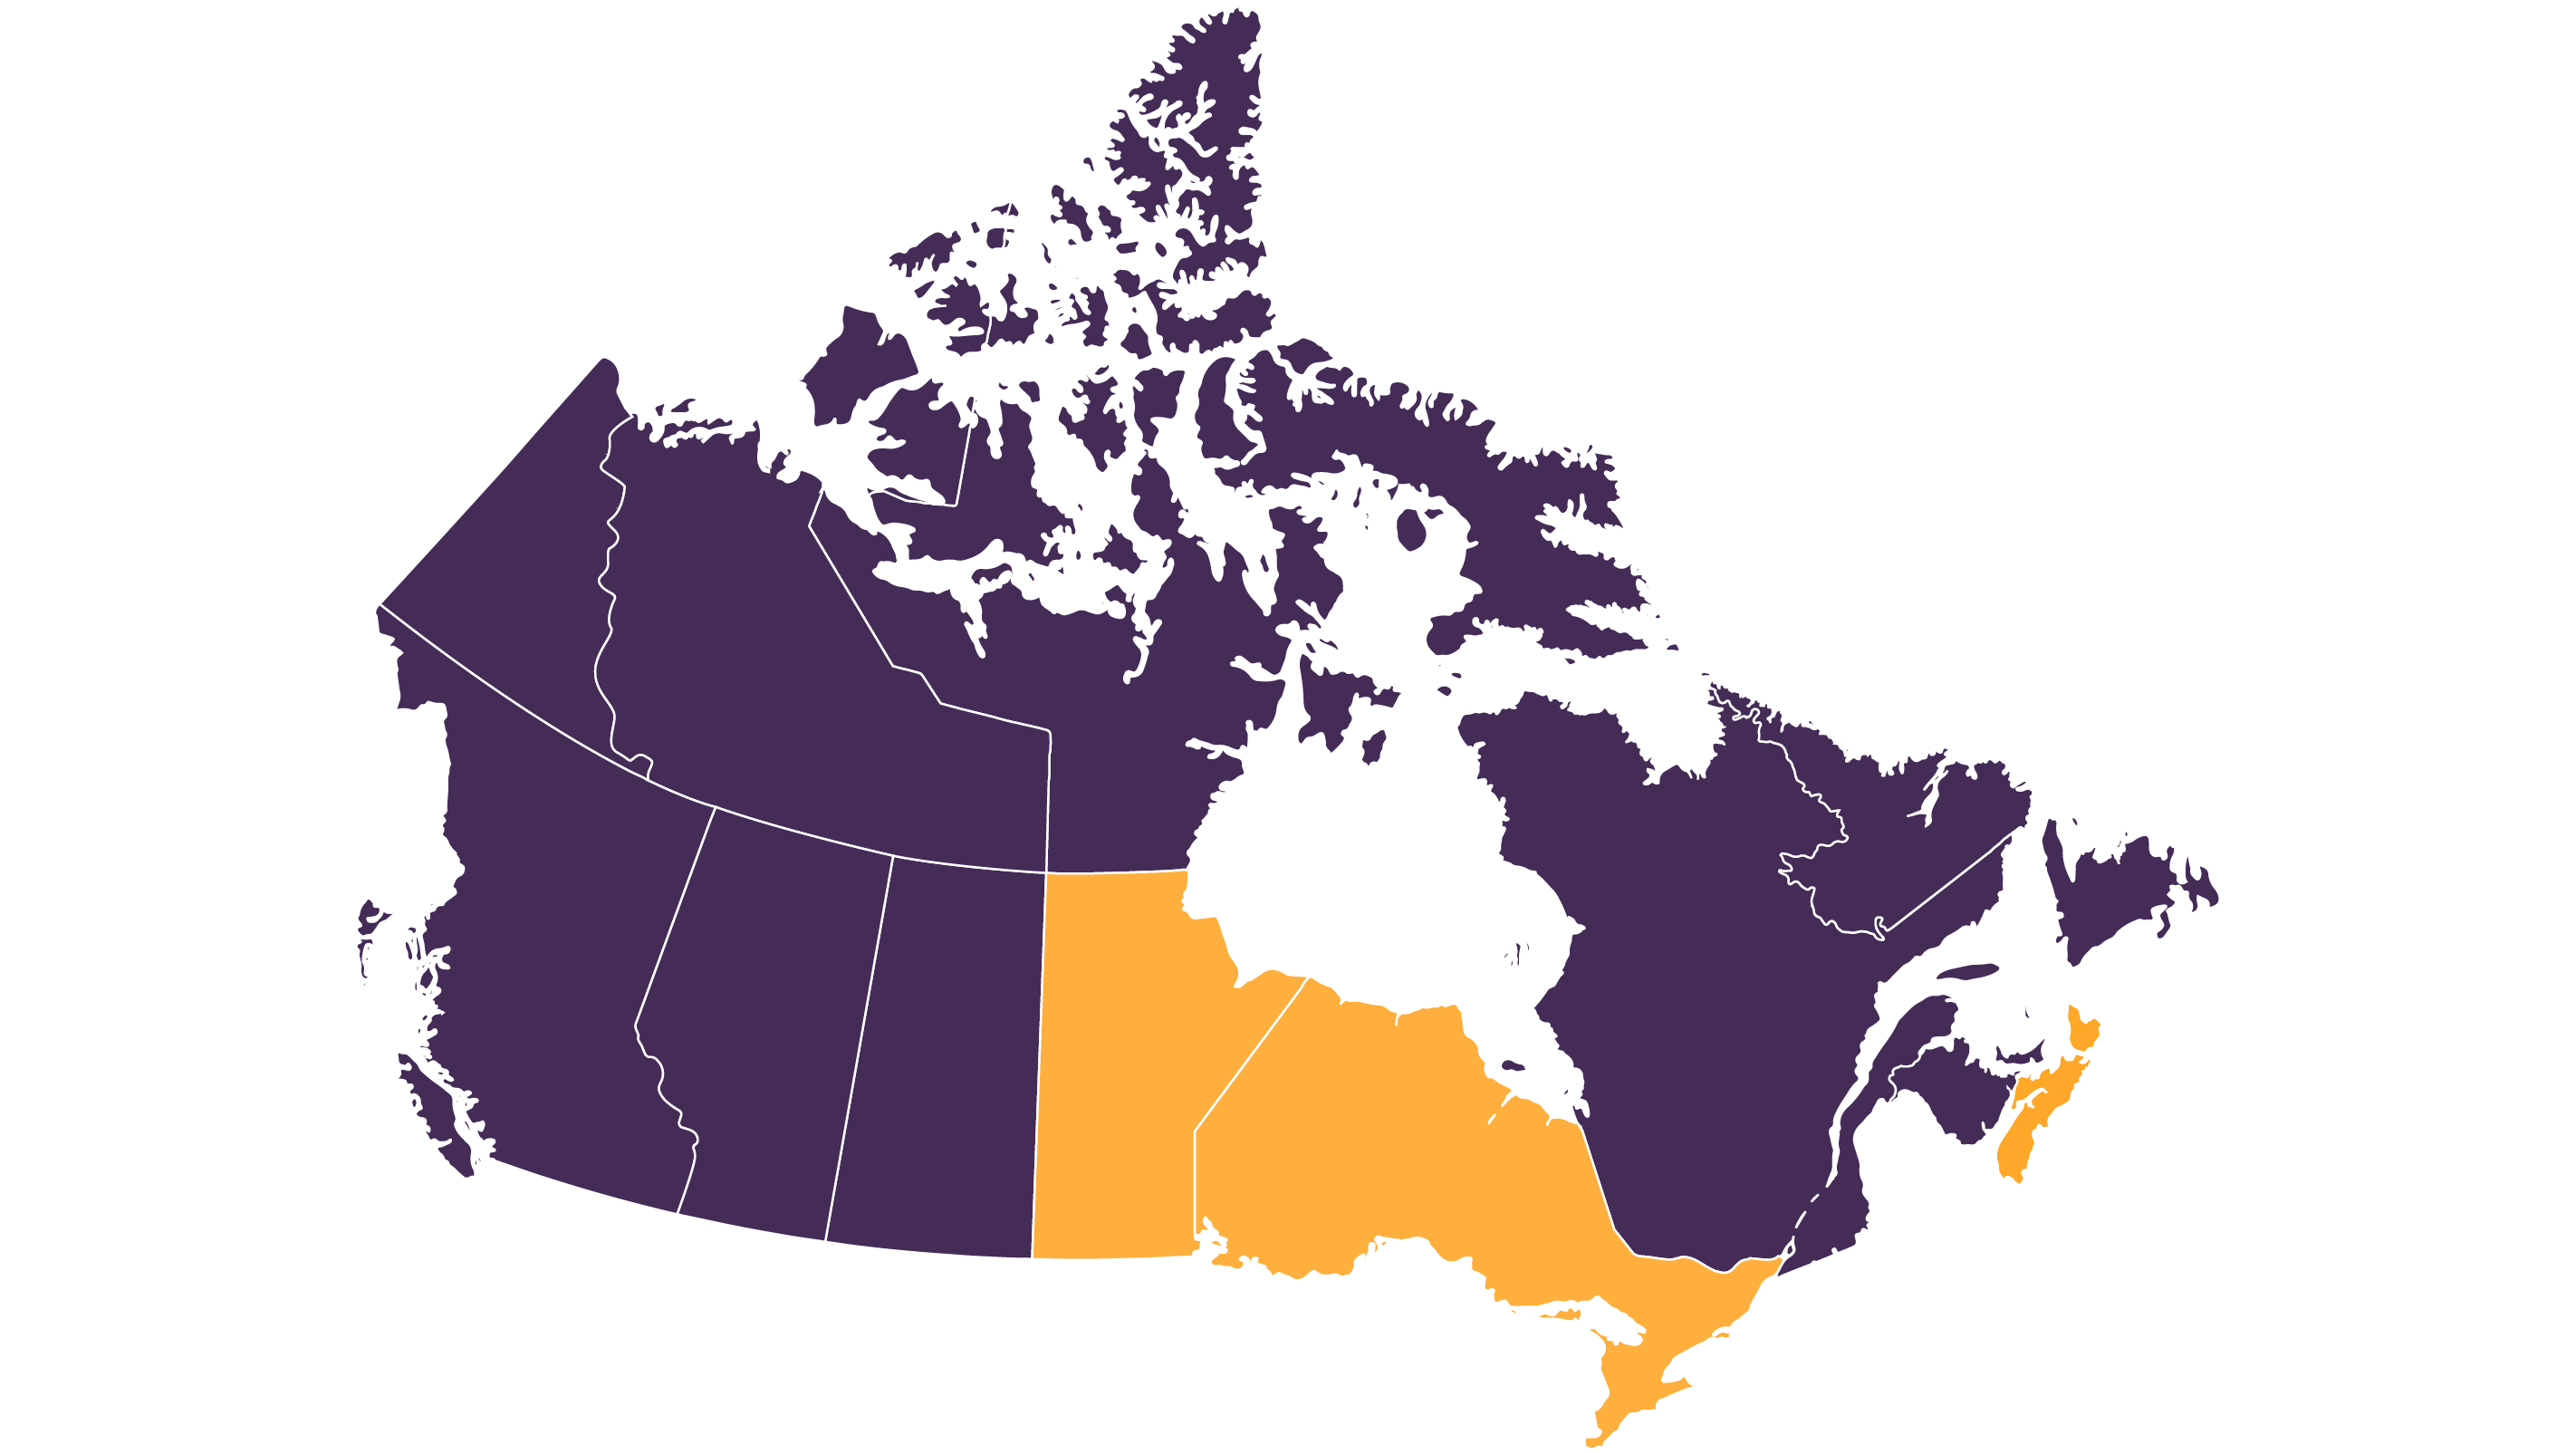 A map of Canada shows Manitoba, Ontario, and Nova Scotia highlighted in yellow.